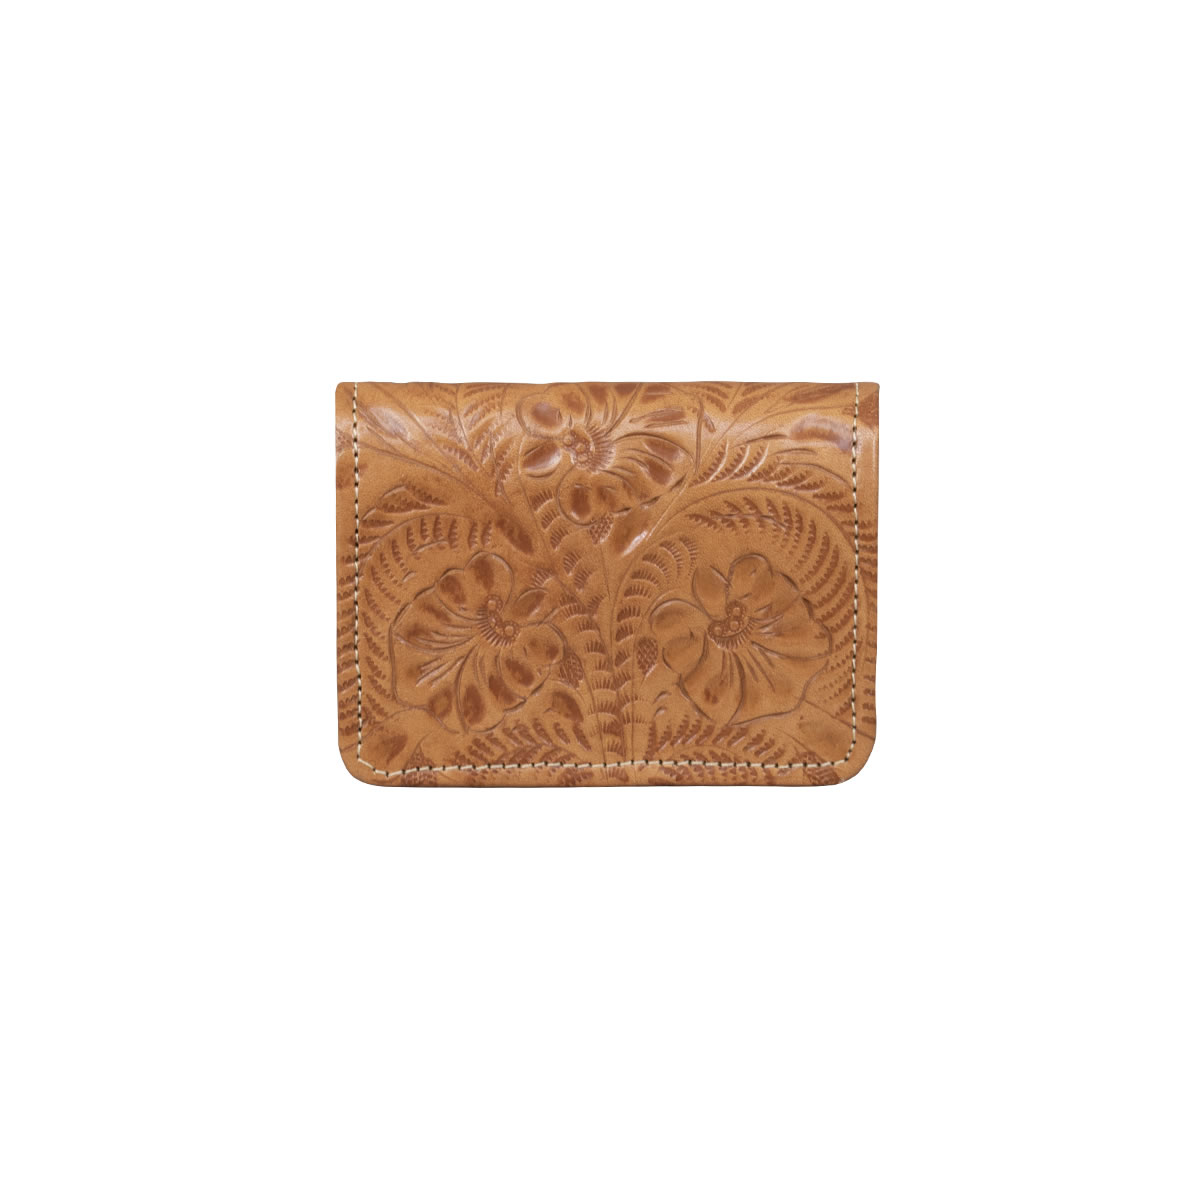 Hurley PLAID Brown White Coral  Floral Tri-Fold Discounted Junior's Wallet 